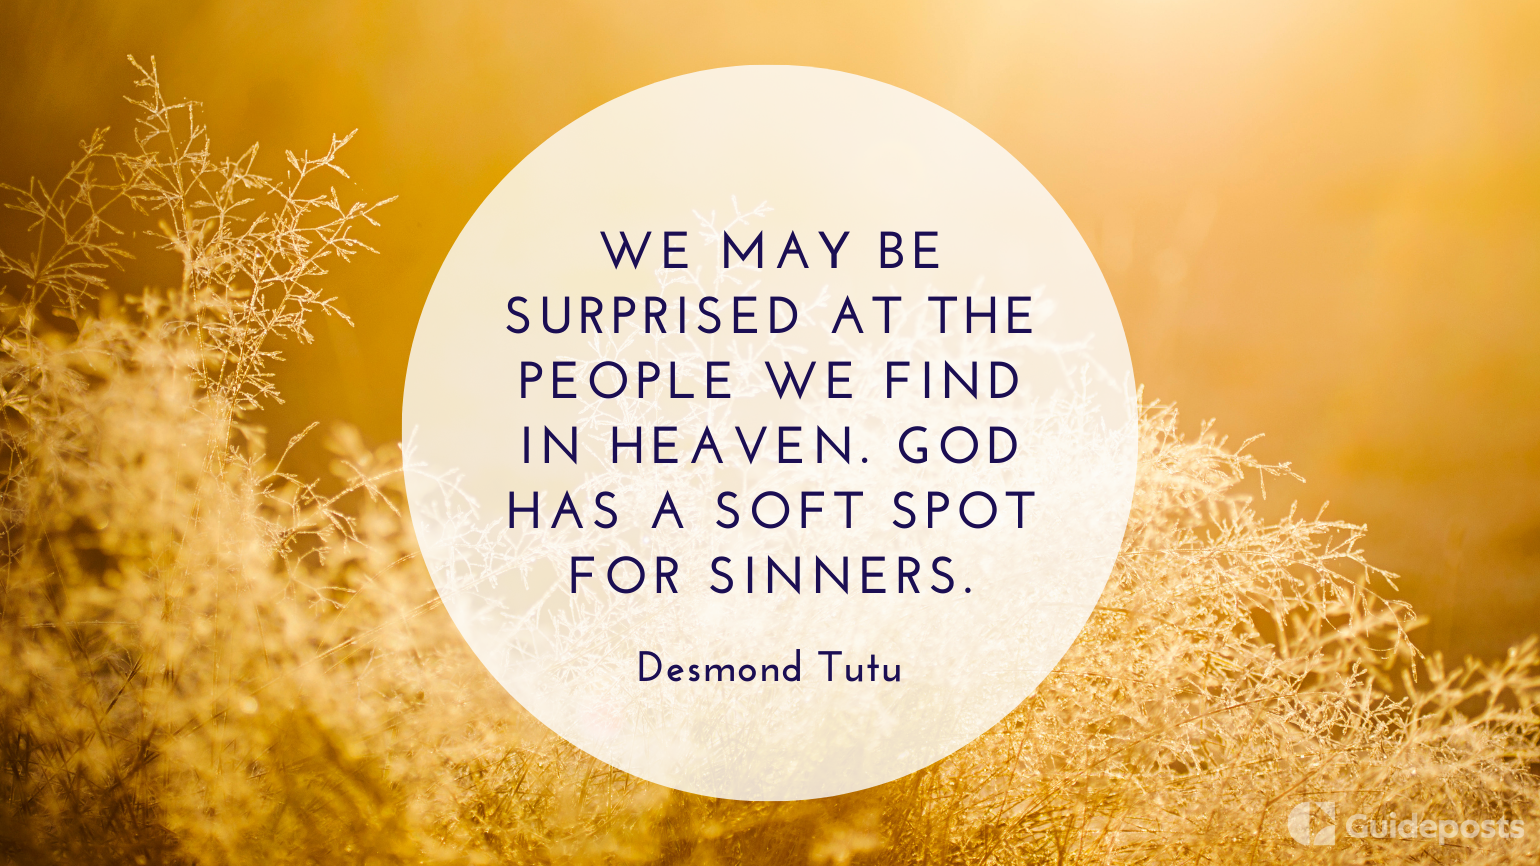 We may be surprised at the people we find in heaven. God has a soft spot for sinners.  —Desmond Tutu